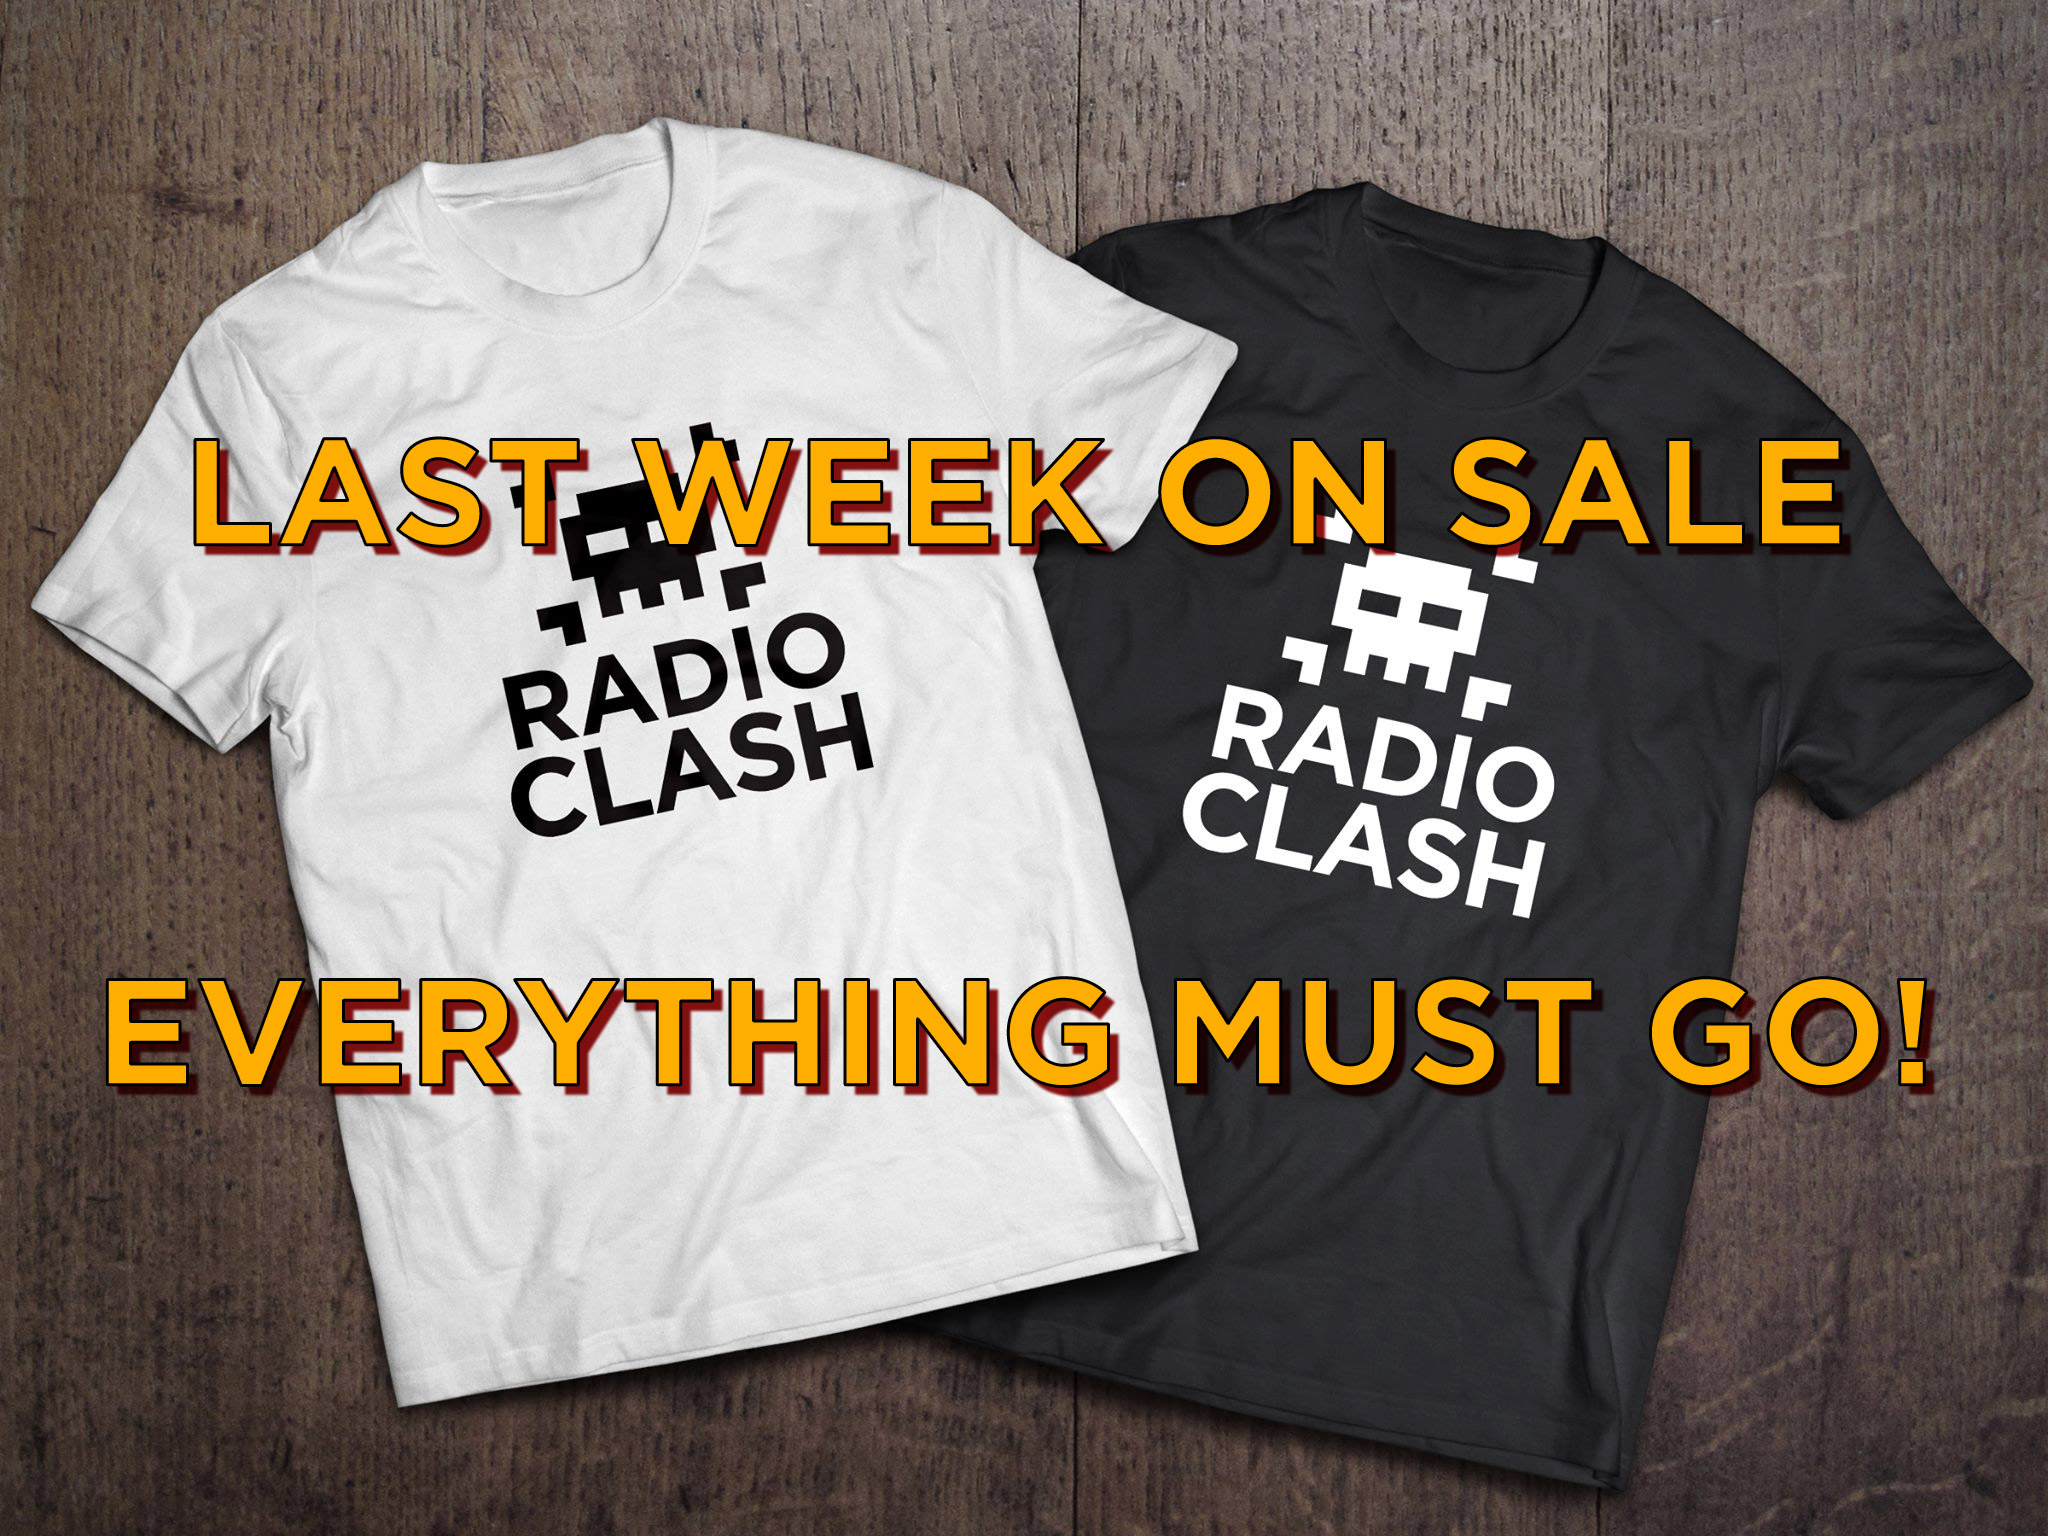 radioclash tshirts sale - Radio Clash Podcast Last chance for the Radio Clash T-Shirts Radio Clash Music Mashup Podcast brings you the best in eclectic tunes, mashups and remixes from around the world. Since 2004, we've been bringing you the freshest and most innovative music from a diverse range of genres and cultures. Join us on our musical journey as we explore the sounds of yesterday, today, and tomorrow. Discover new music and be inspired by the mashup of musical styles that only Radio Clash can provide. Subscribe now to elevate your musical experience!